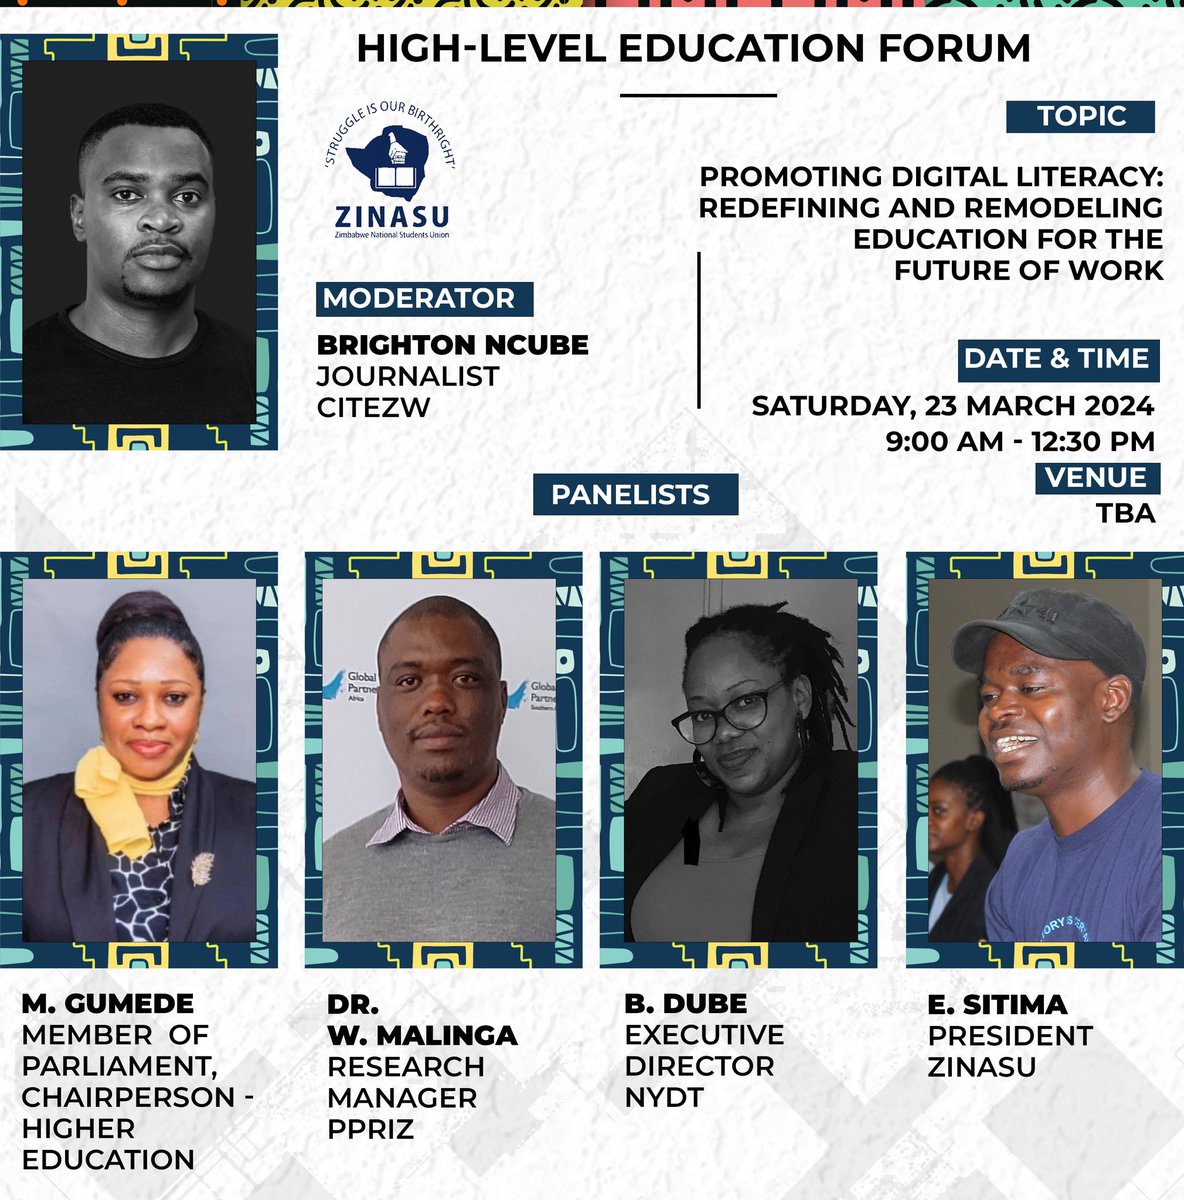 High- Level Education Forum ( Second Edition).

Join us tomorrow as we are Deliberating on Promoting Digital Literacy
Redefining and remodeling education for the future of work !!!

#HighLevelEducationForum
#EducationForAll